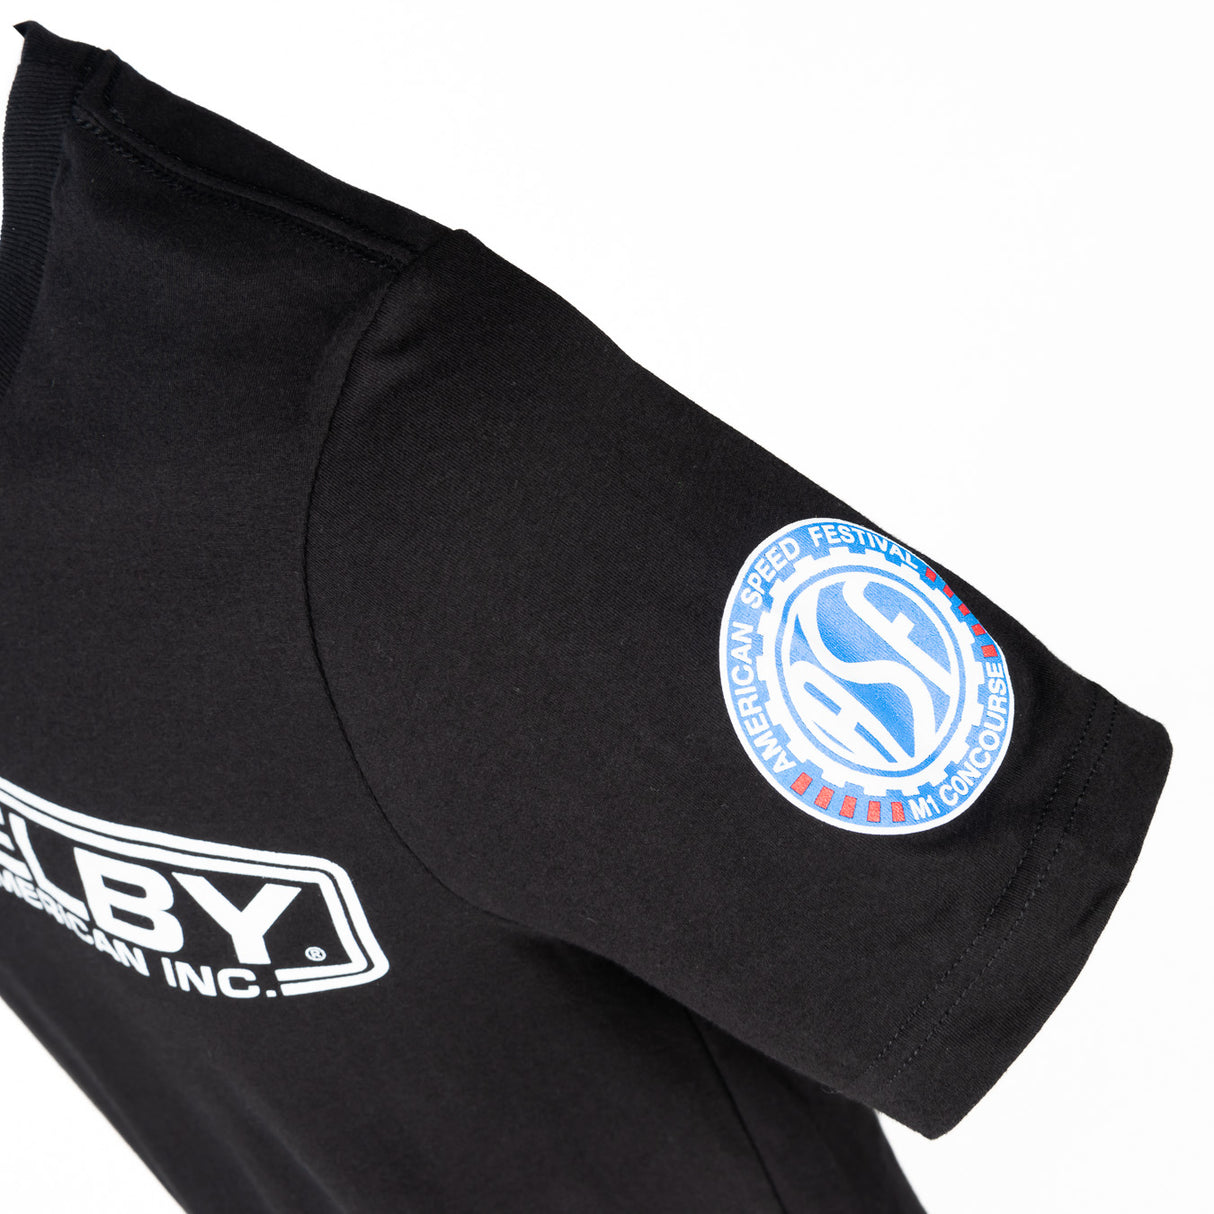 Shelby T shirt with ASF logo on sleeve